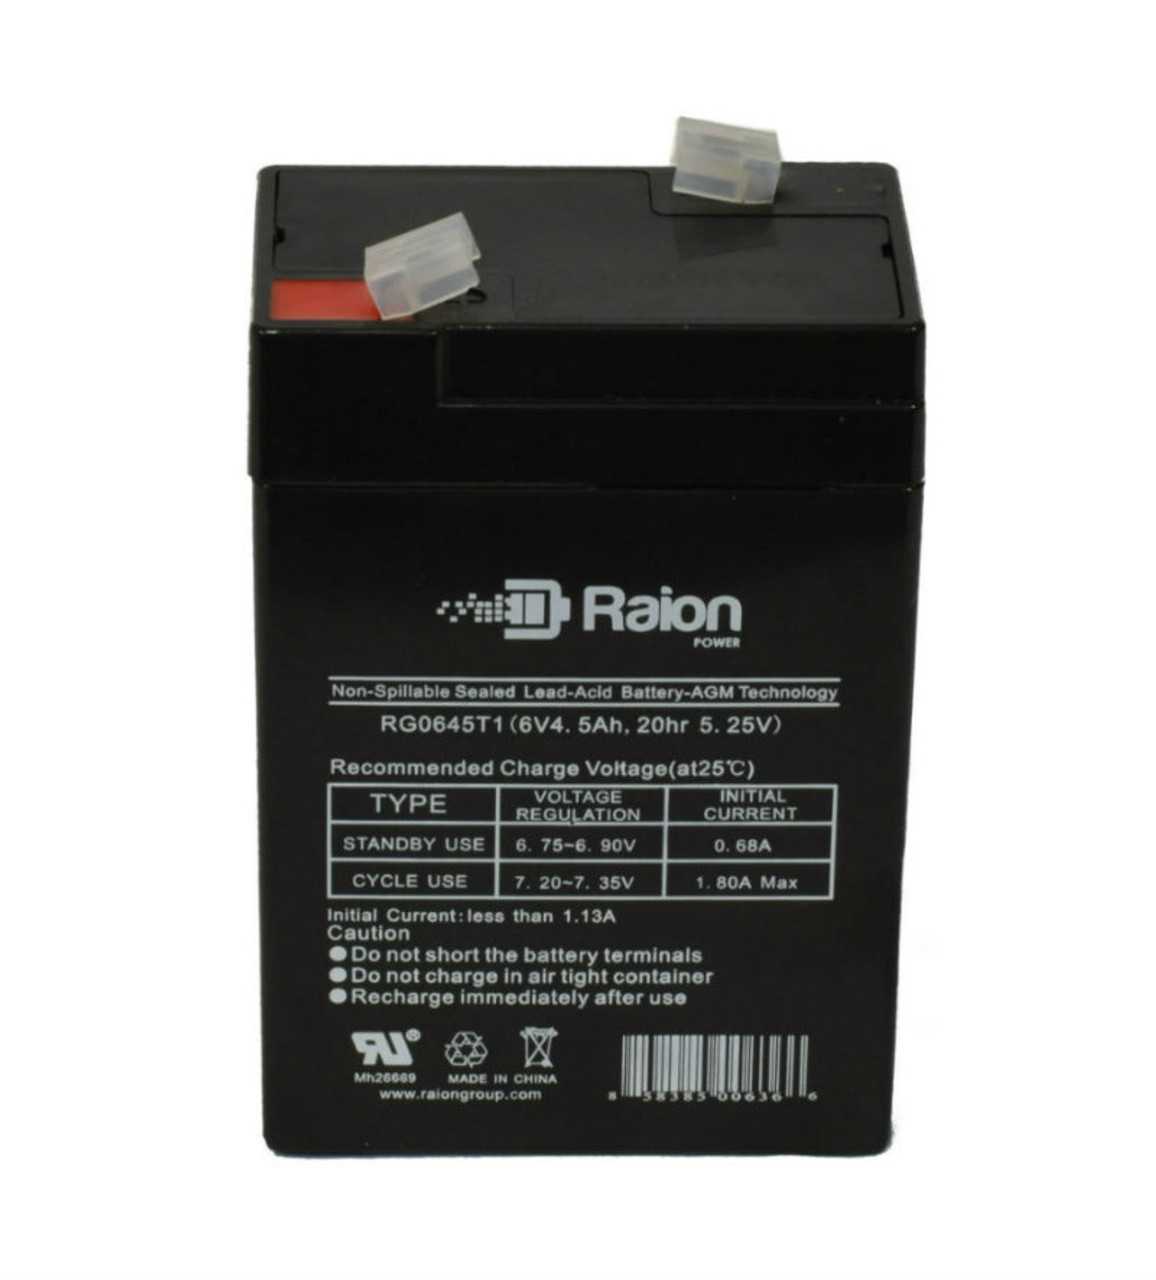 Raion Power RG0645T1 Replacement Battery Cartridge for Drypower 6SB5P